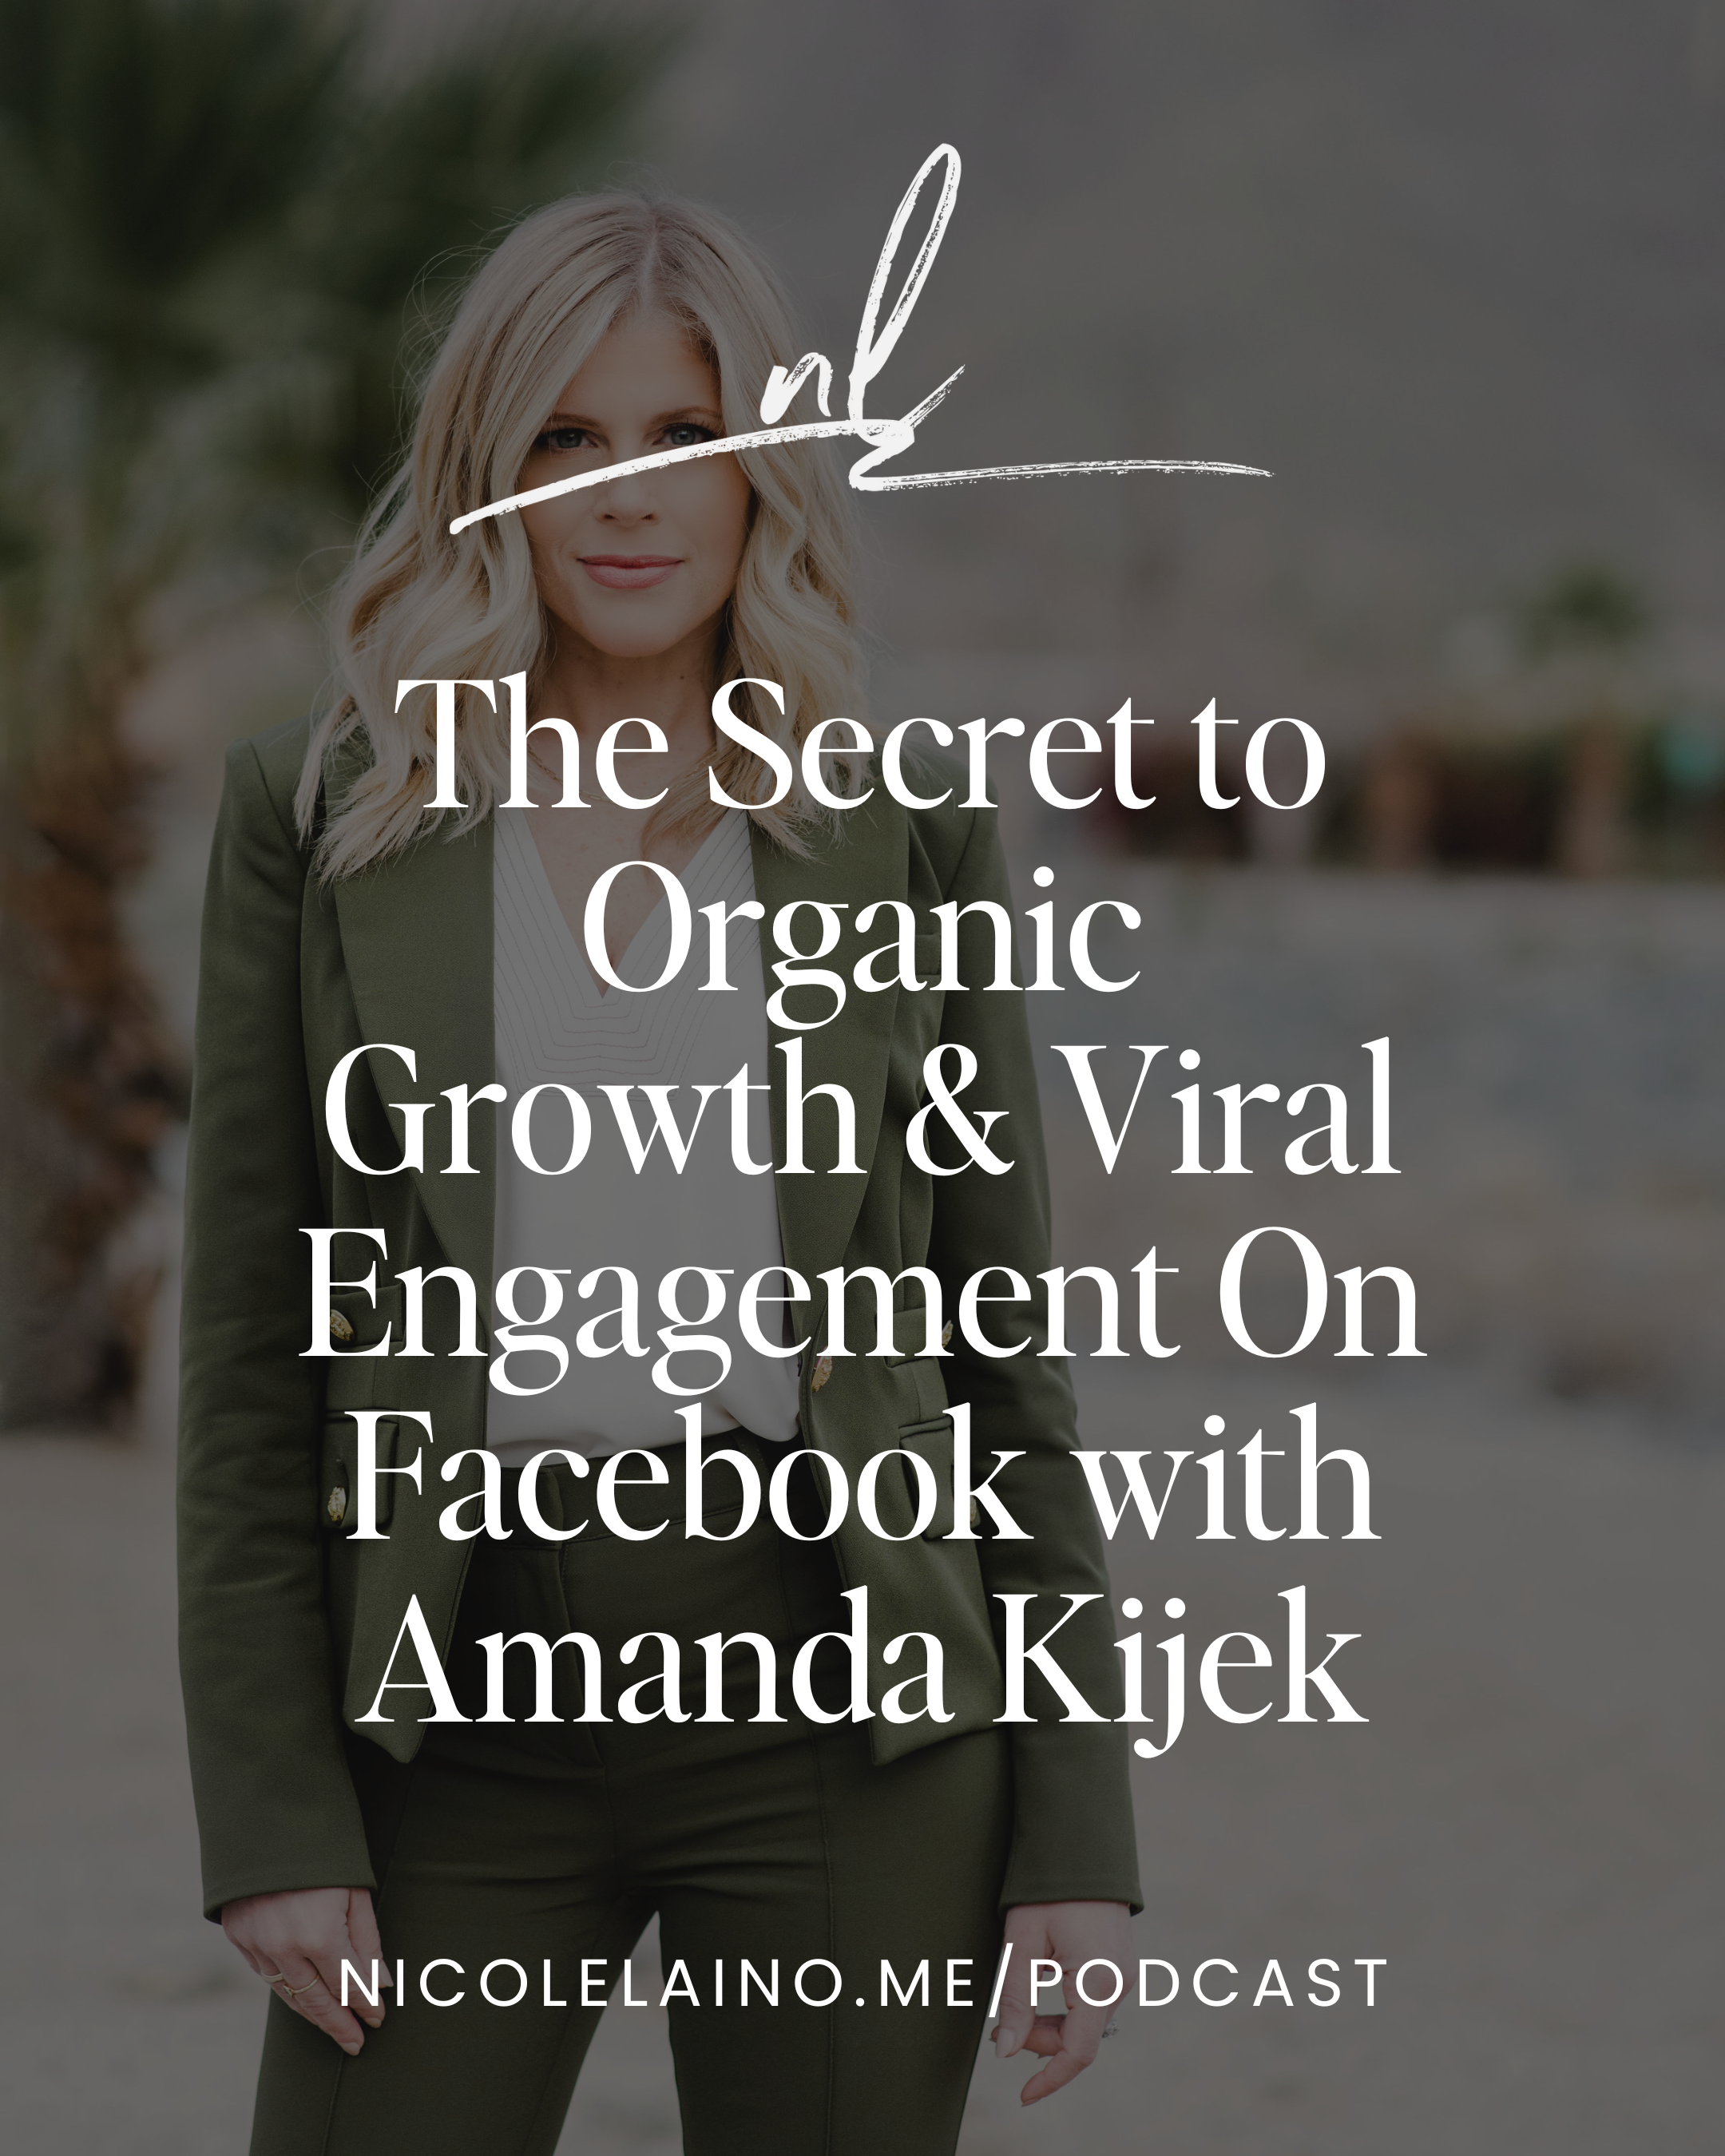 The Secret to Organic Growth & Viral Engagement On Facebook with Amanda Kije‪k‬